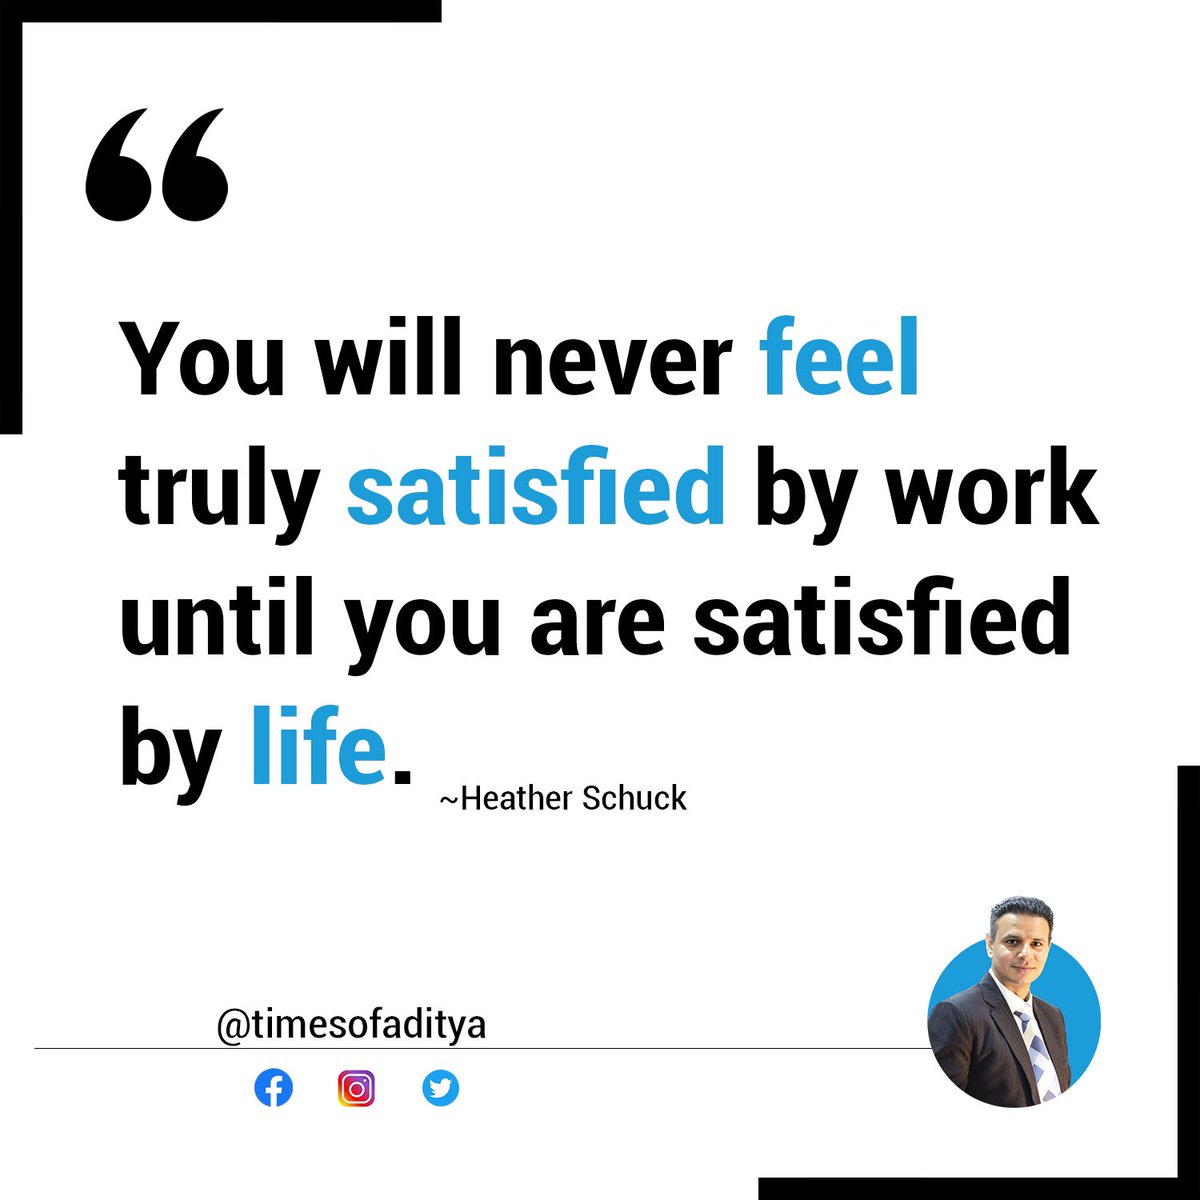 Your work satisfaction is very much connected to your life contentment. Prioritize personal well-being, nurture your passions, and let that positivity reflect in your professional journey.

#wednesdaymotivation #quoteoftheday #motivation #personalwellbeing #nurtureyourself